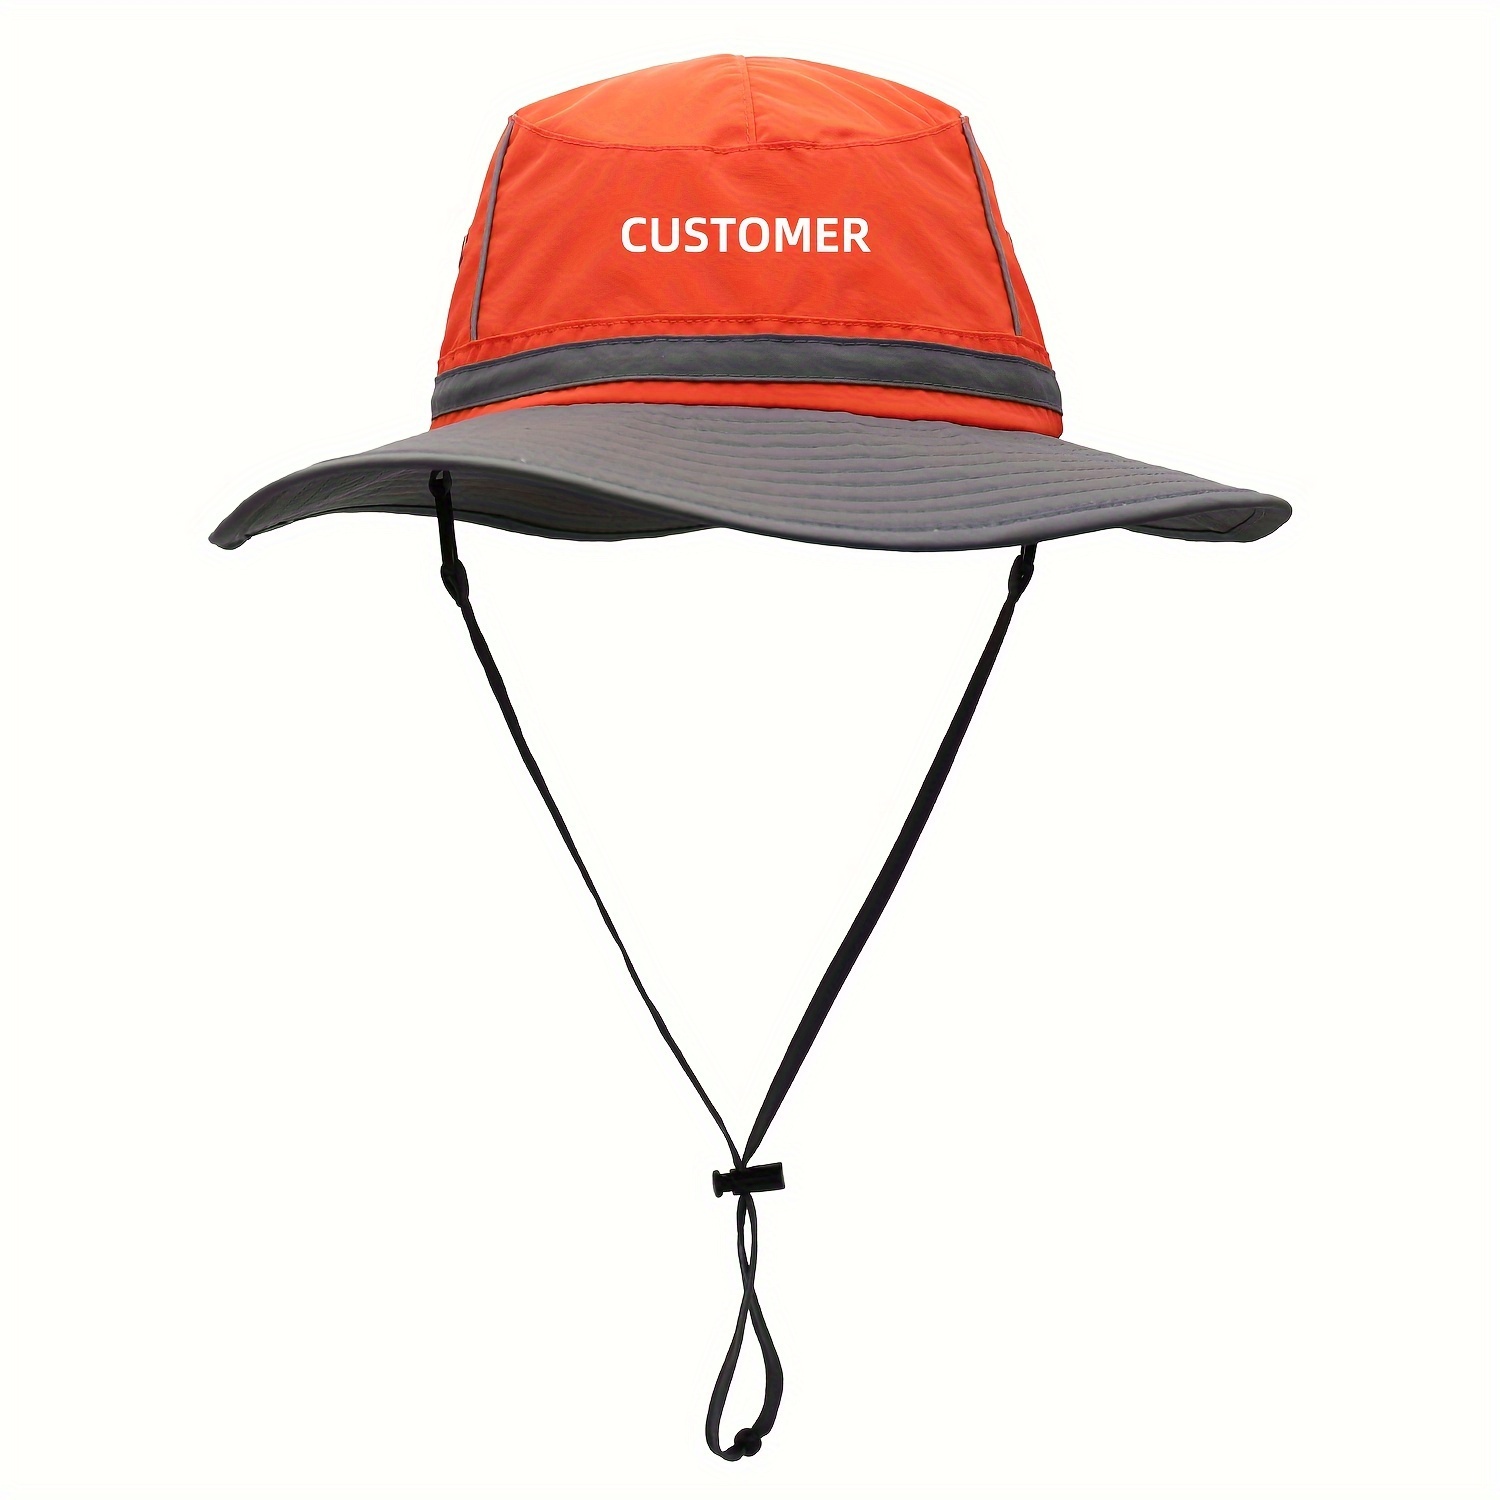 

Custom Color Block Fishing Hat With Reflective Strap And Adjustable Drawstring For Spring/summer Outdoor Activities